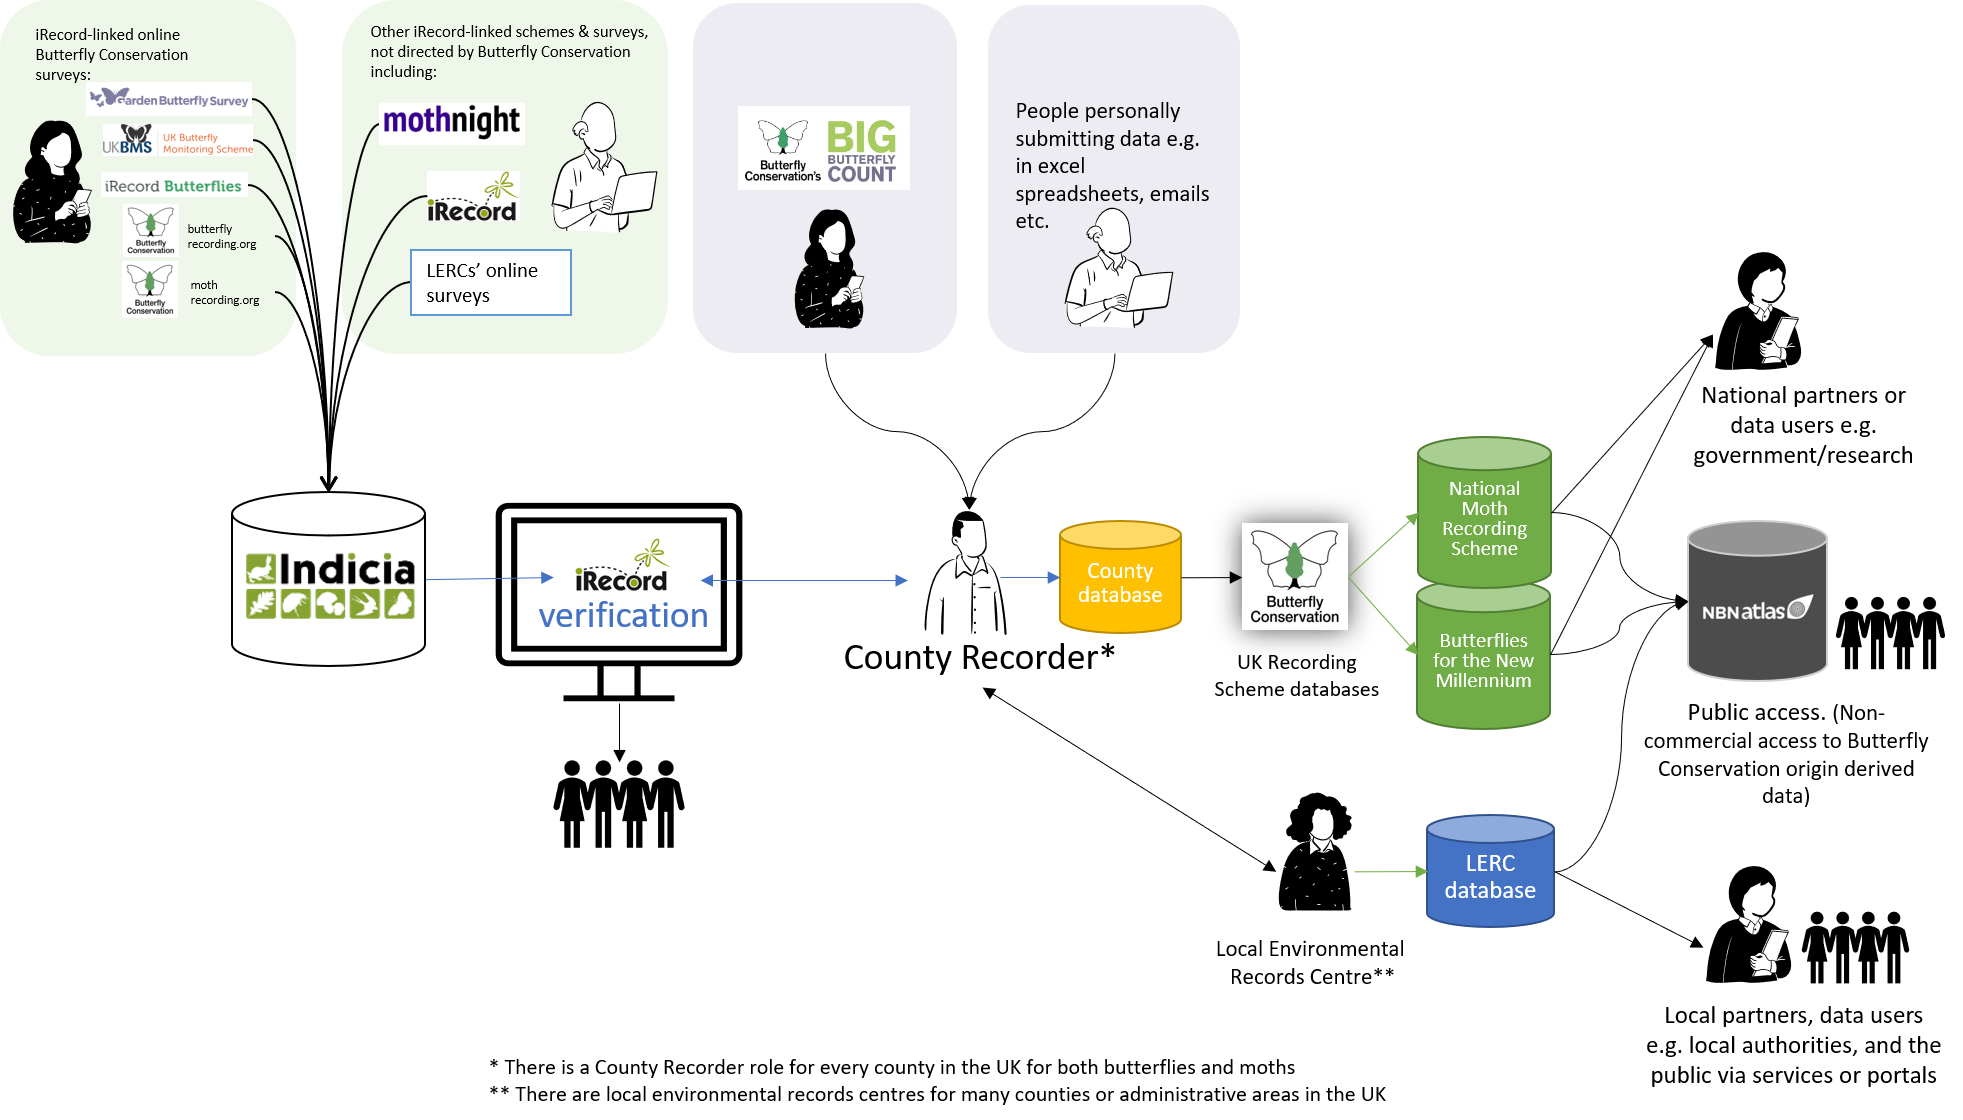 The process of data flow via iRecord for butterfly and moth UK scheme data. Illustration content is produced with a CC BY 4.0 licence (https://creativecommons.org/licenses/by/4.0/), with the exception of the icons which are copyright Microsoft and the organisational logos.